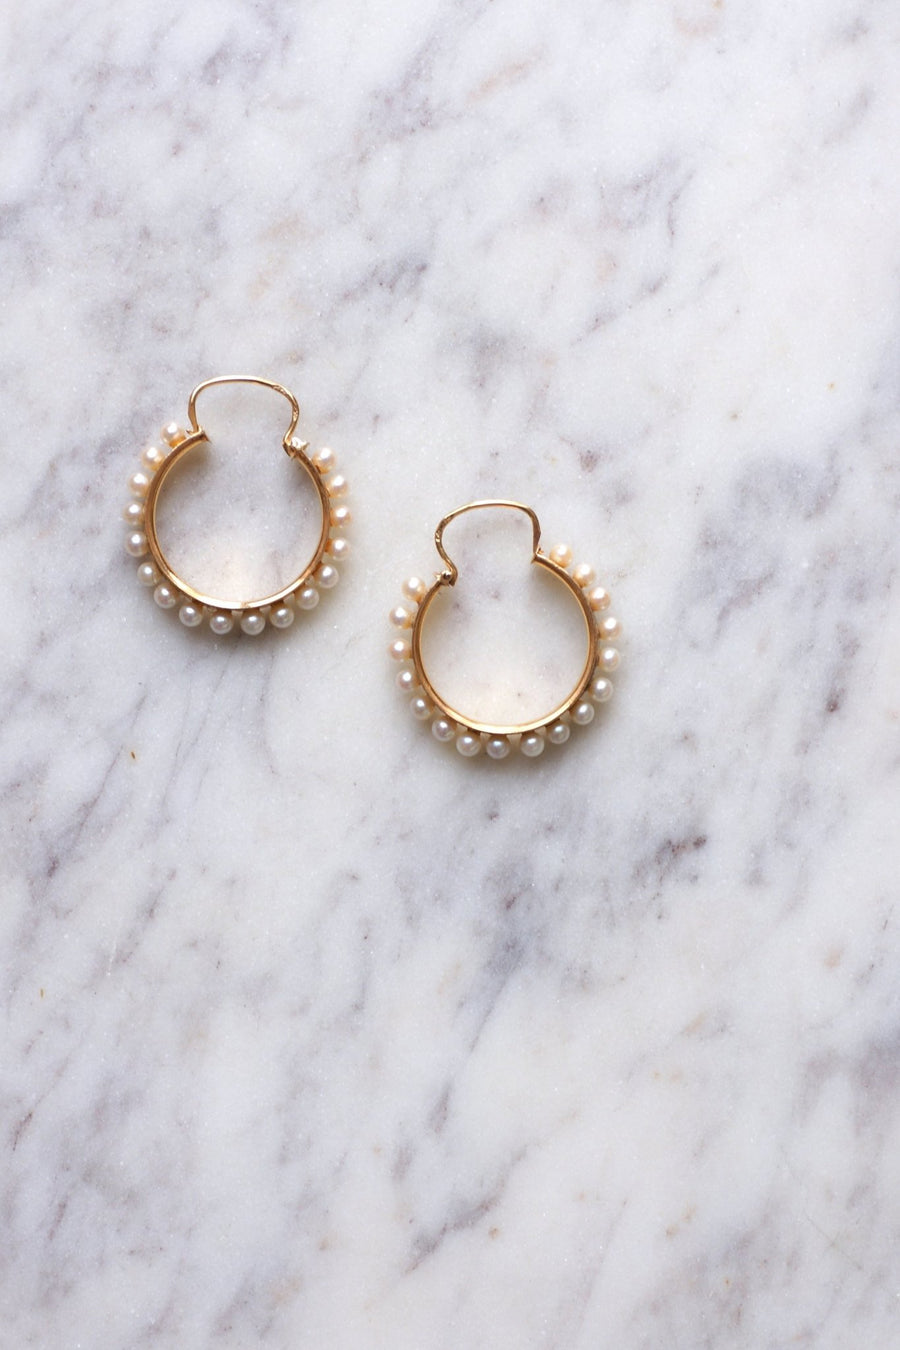 Gold and pearl creole earrings - Galerie Pénélope